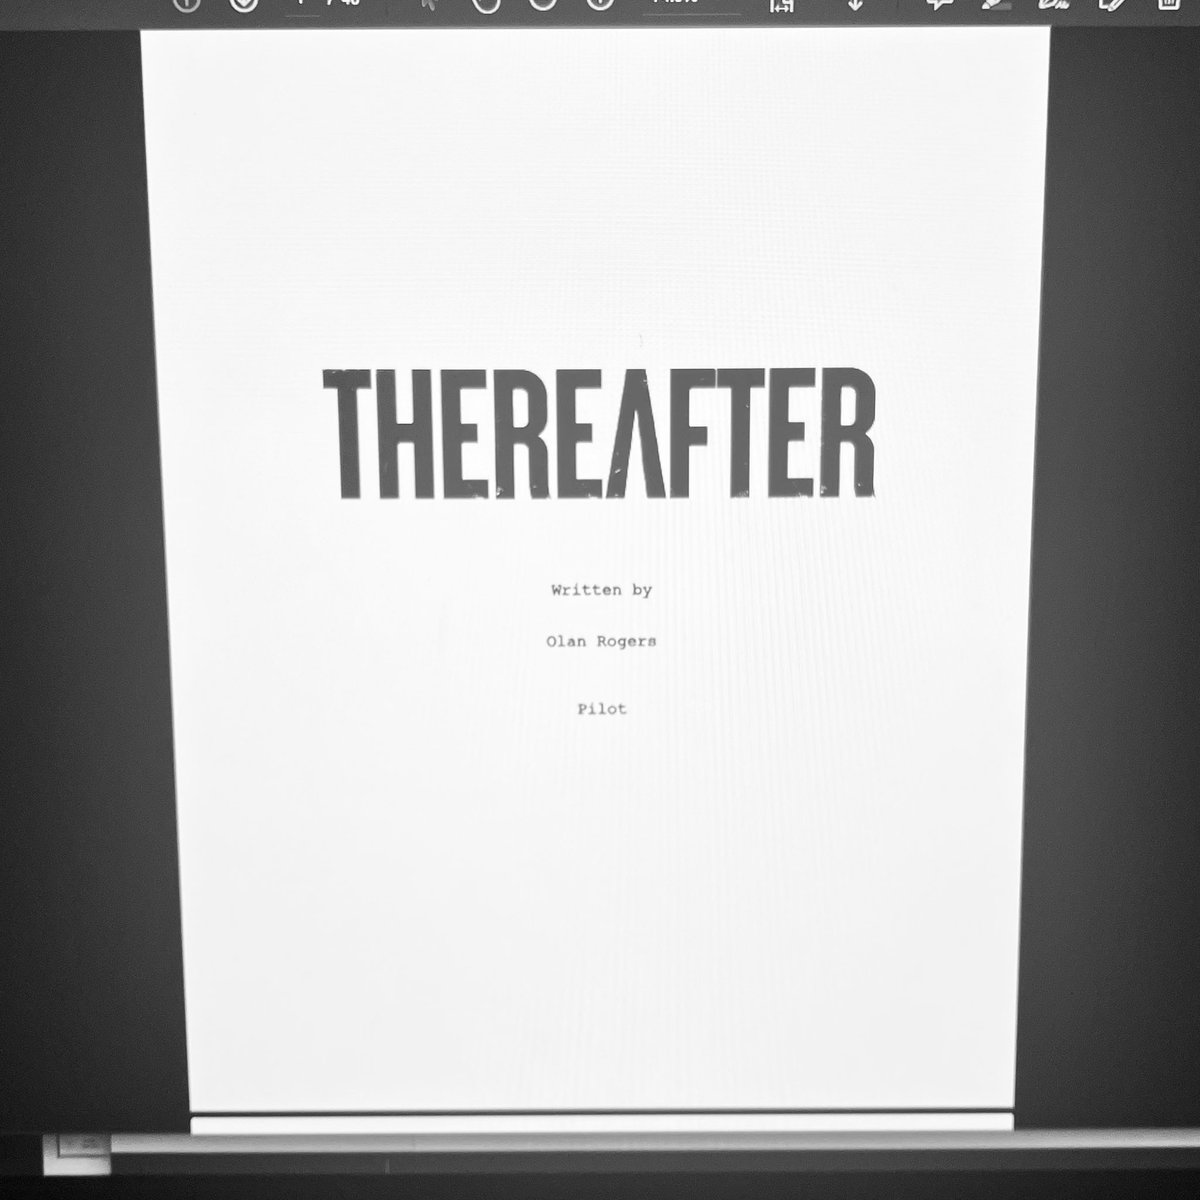 Done. Onto the next script.